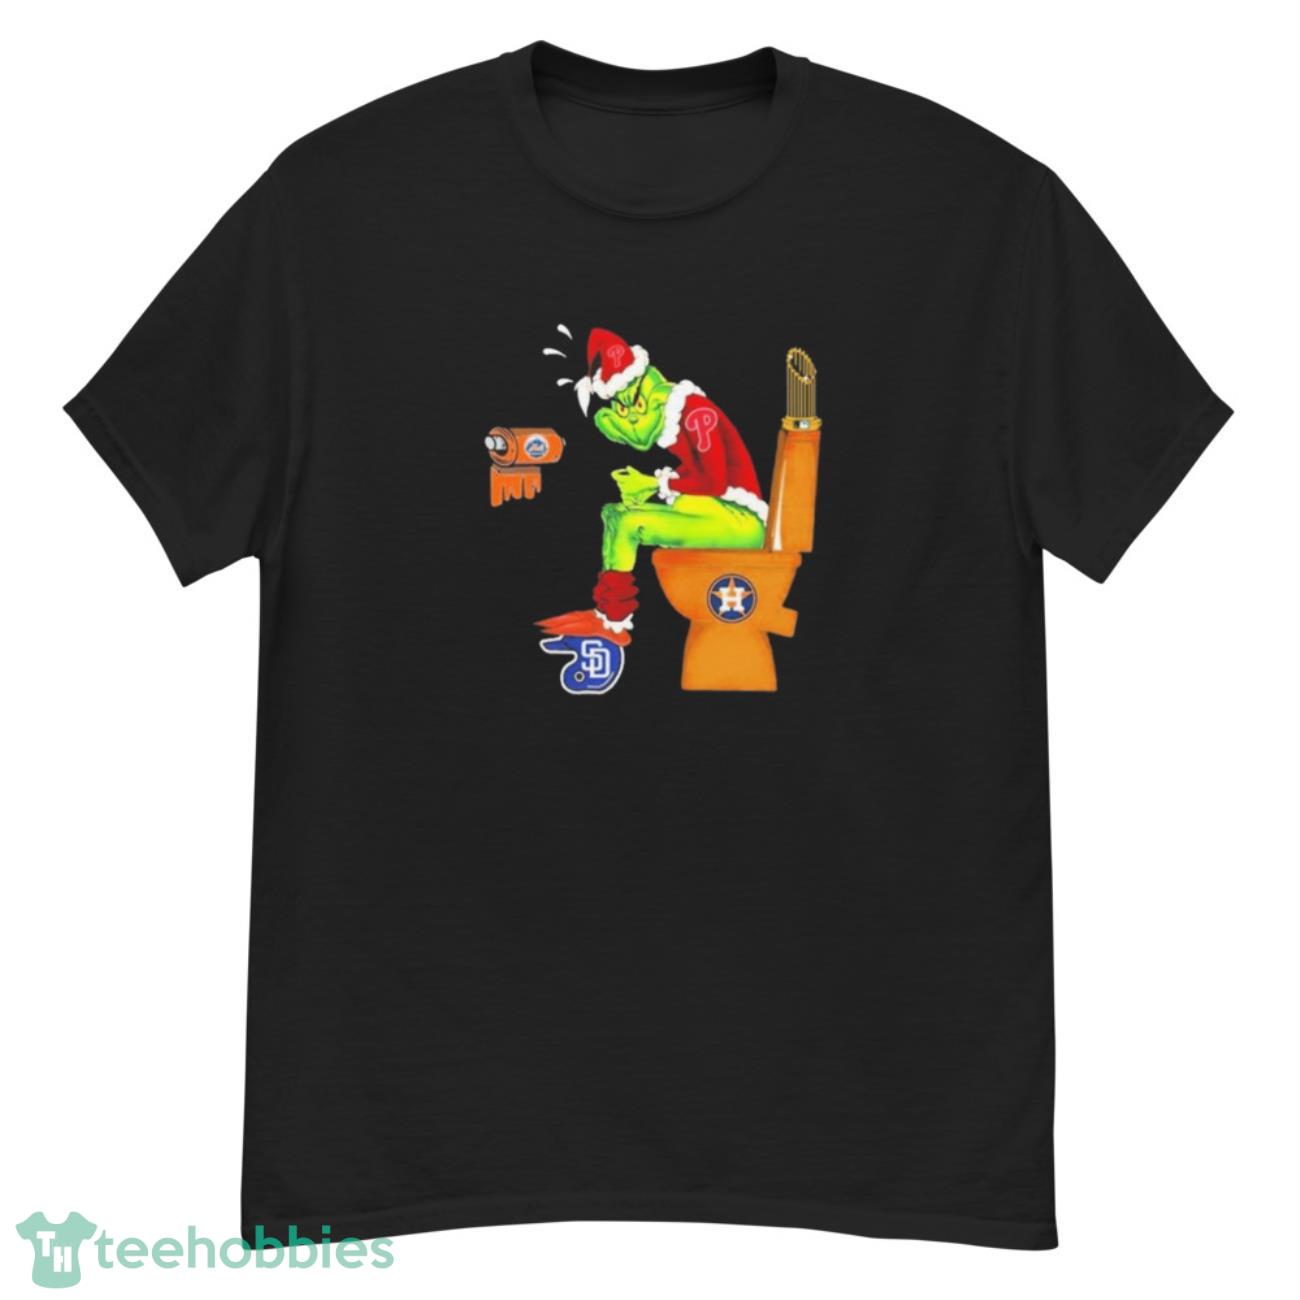 Grinch Philadelphia Phillies Shitting On Toilet Houston Astros And Other Teams 2023 Shirt - G500 Men’s Classic T-Shirt